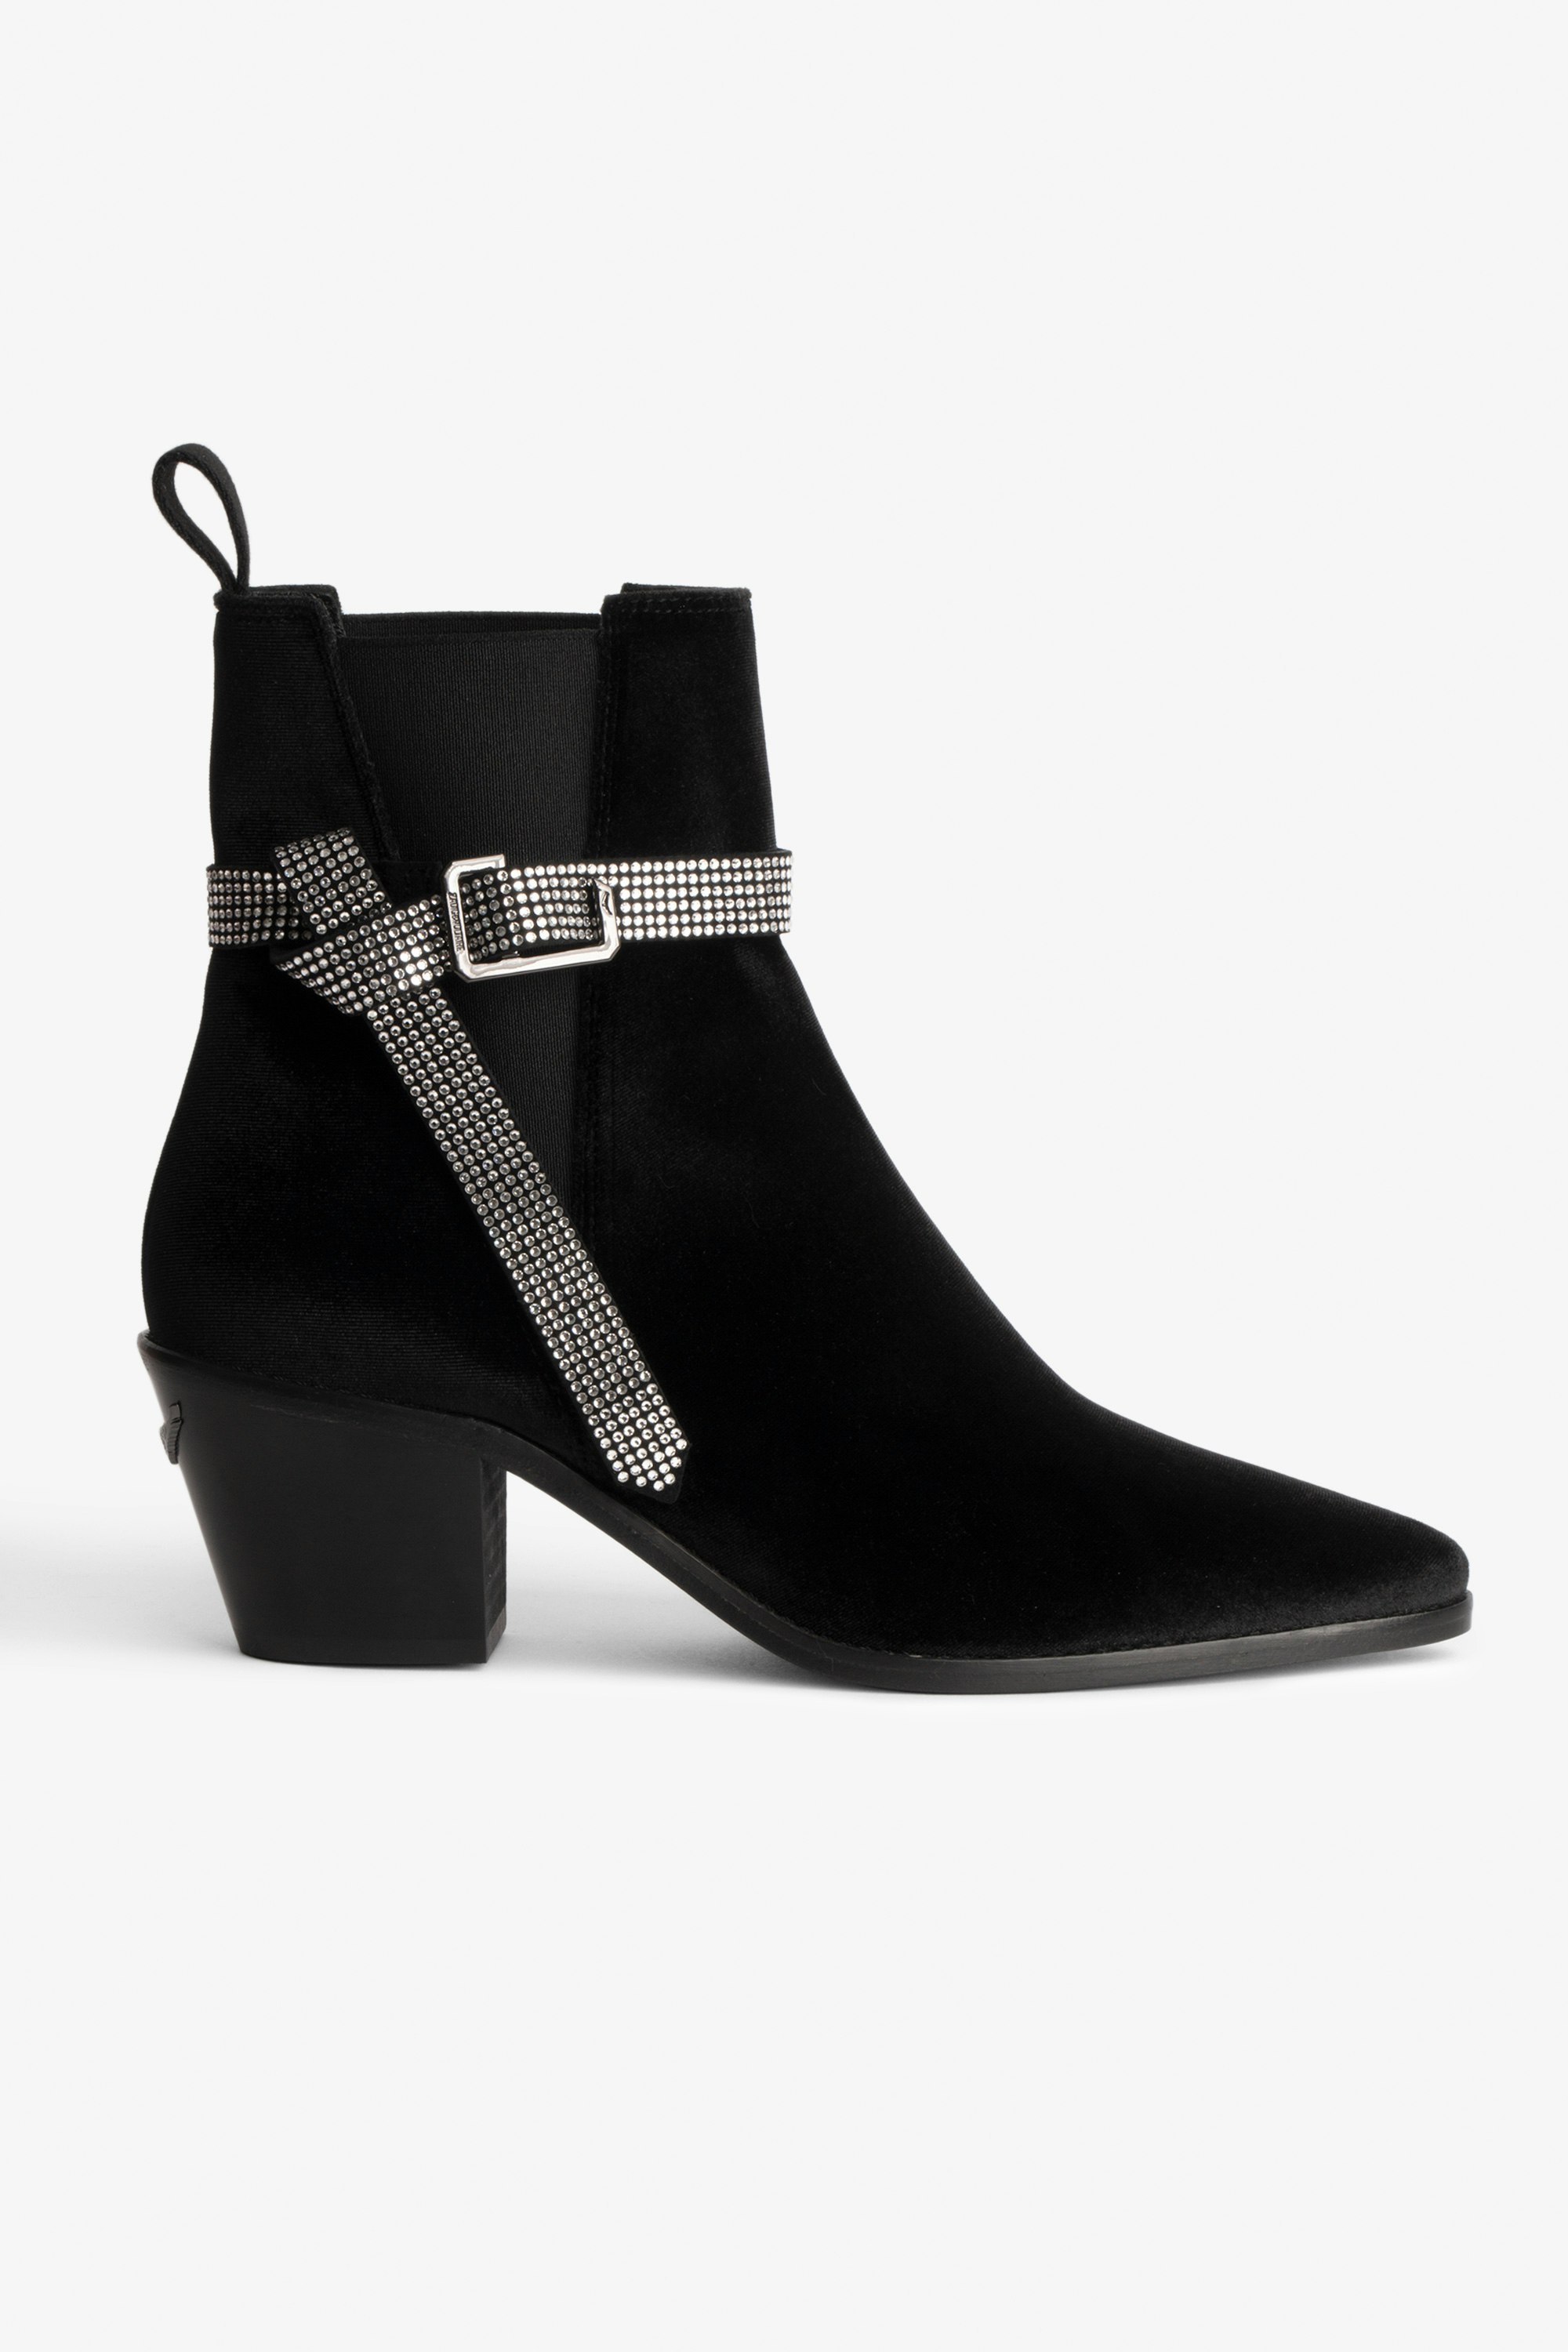 Tyler Cecilia Ankle Boots - Women’s black suede ankle boots